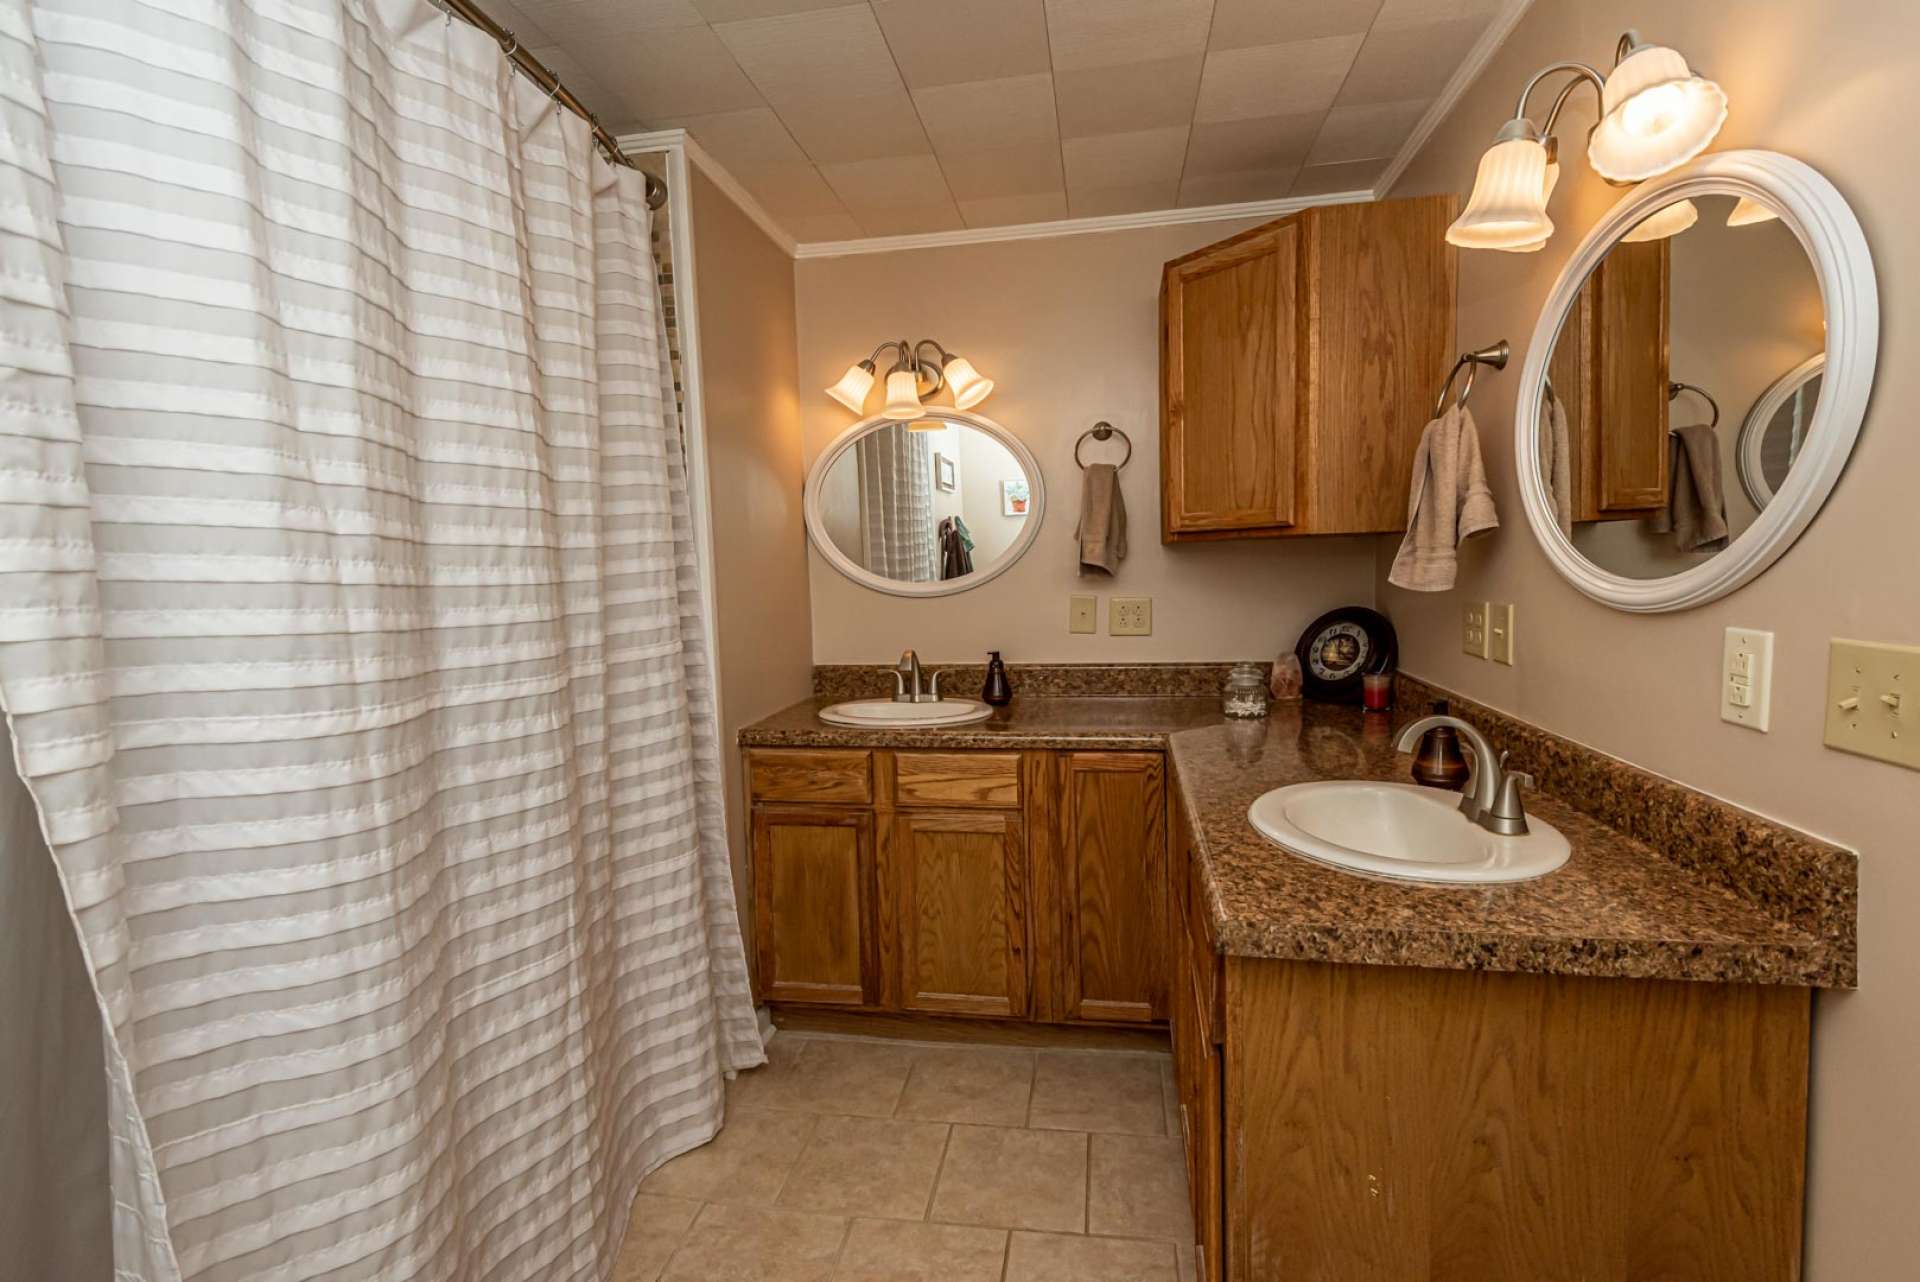 Plenty of space in the master bath.